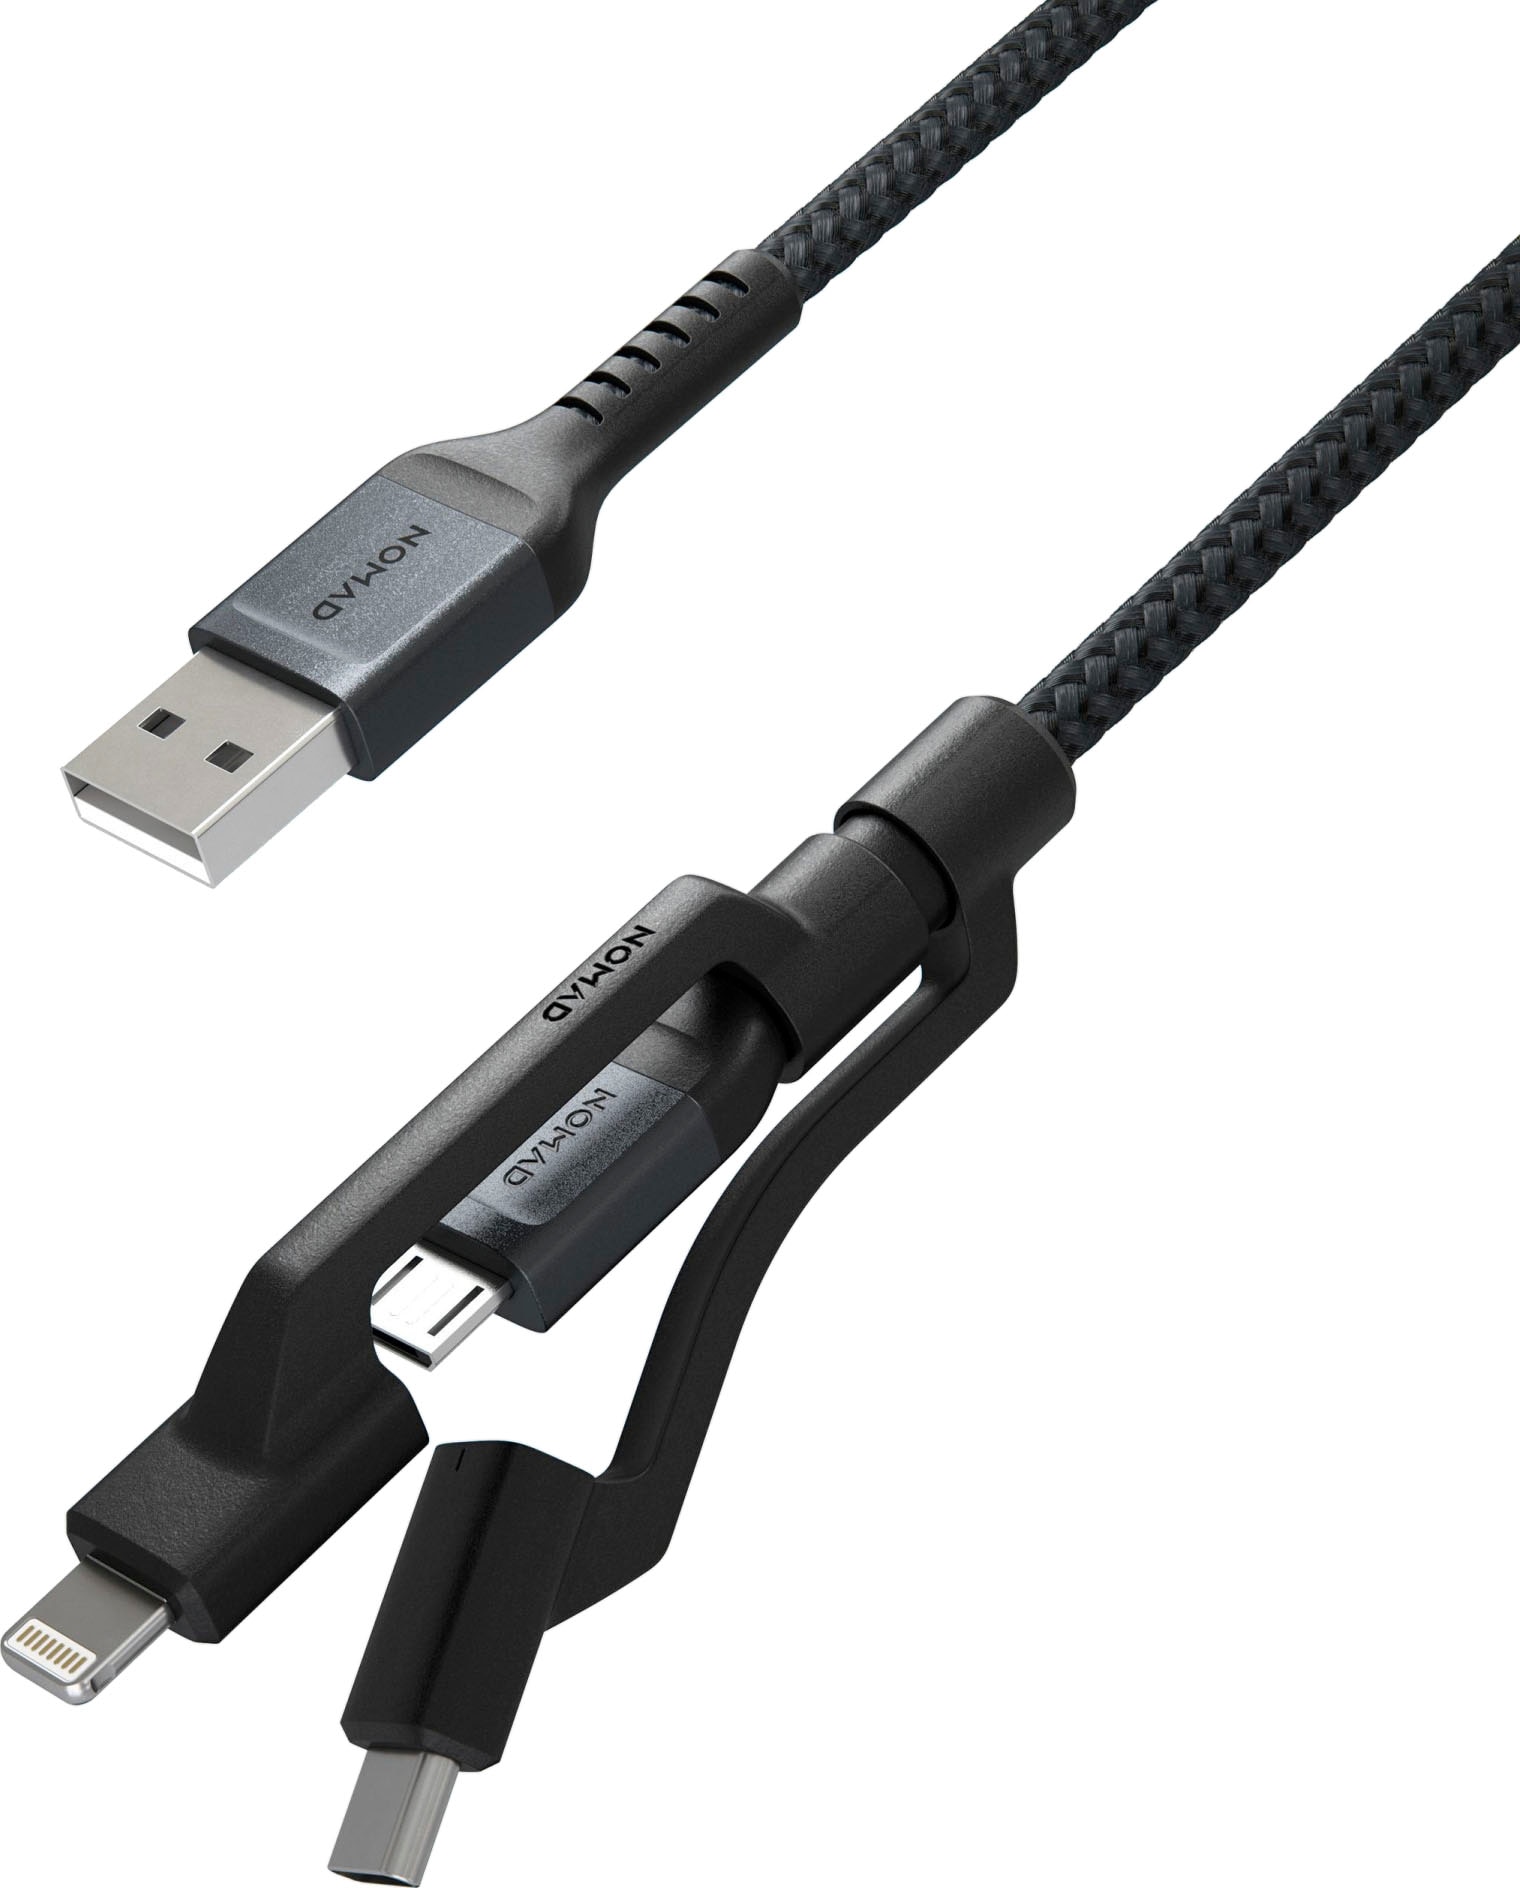 Nomad Smartphone-Kabel »Universal Cable USB-A«, USB Typ A-Micro-USB-Lightning-USB-C, 150 cm